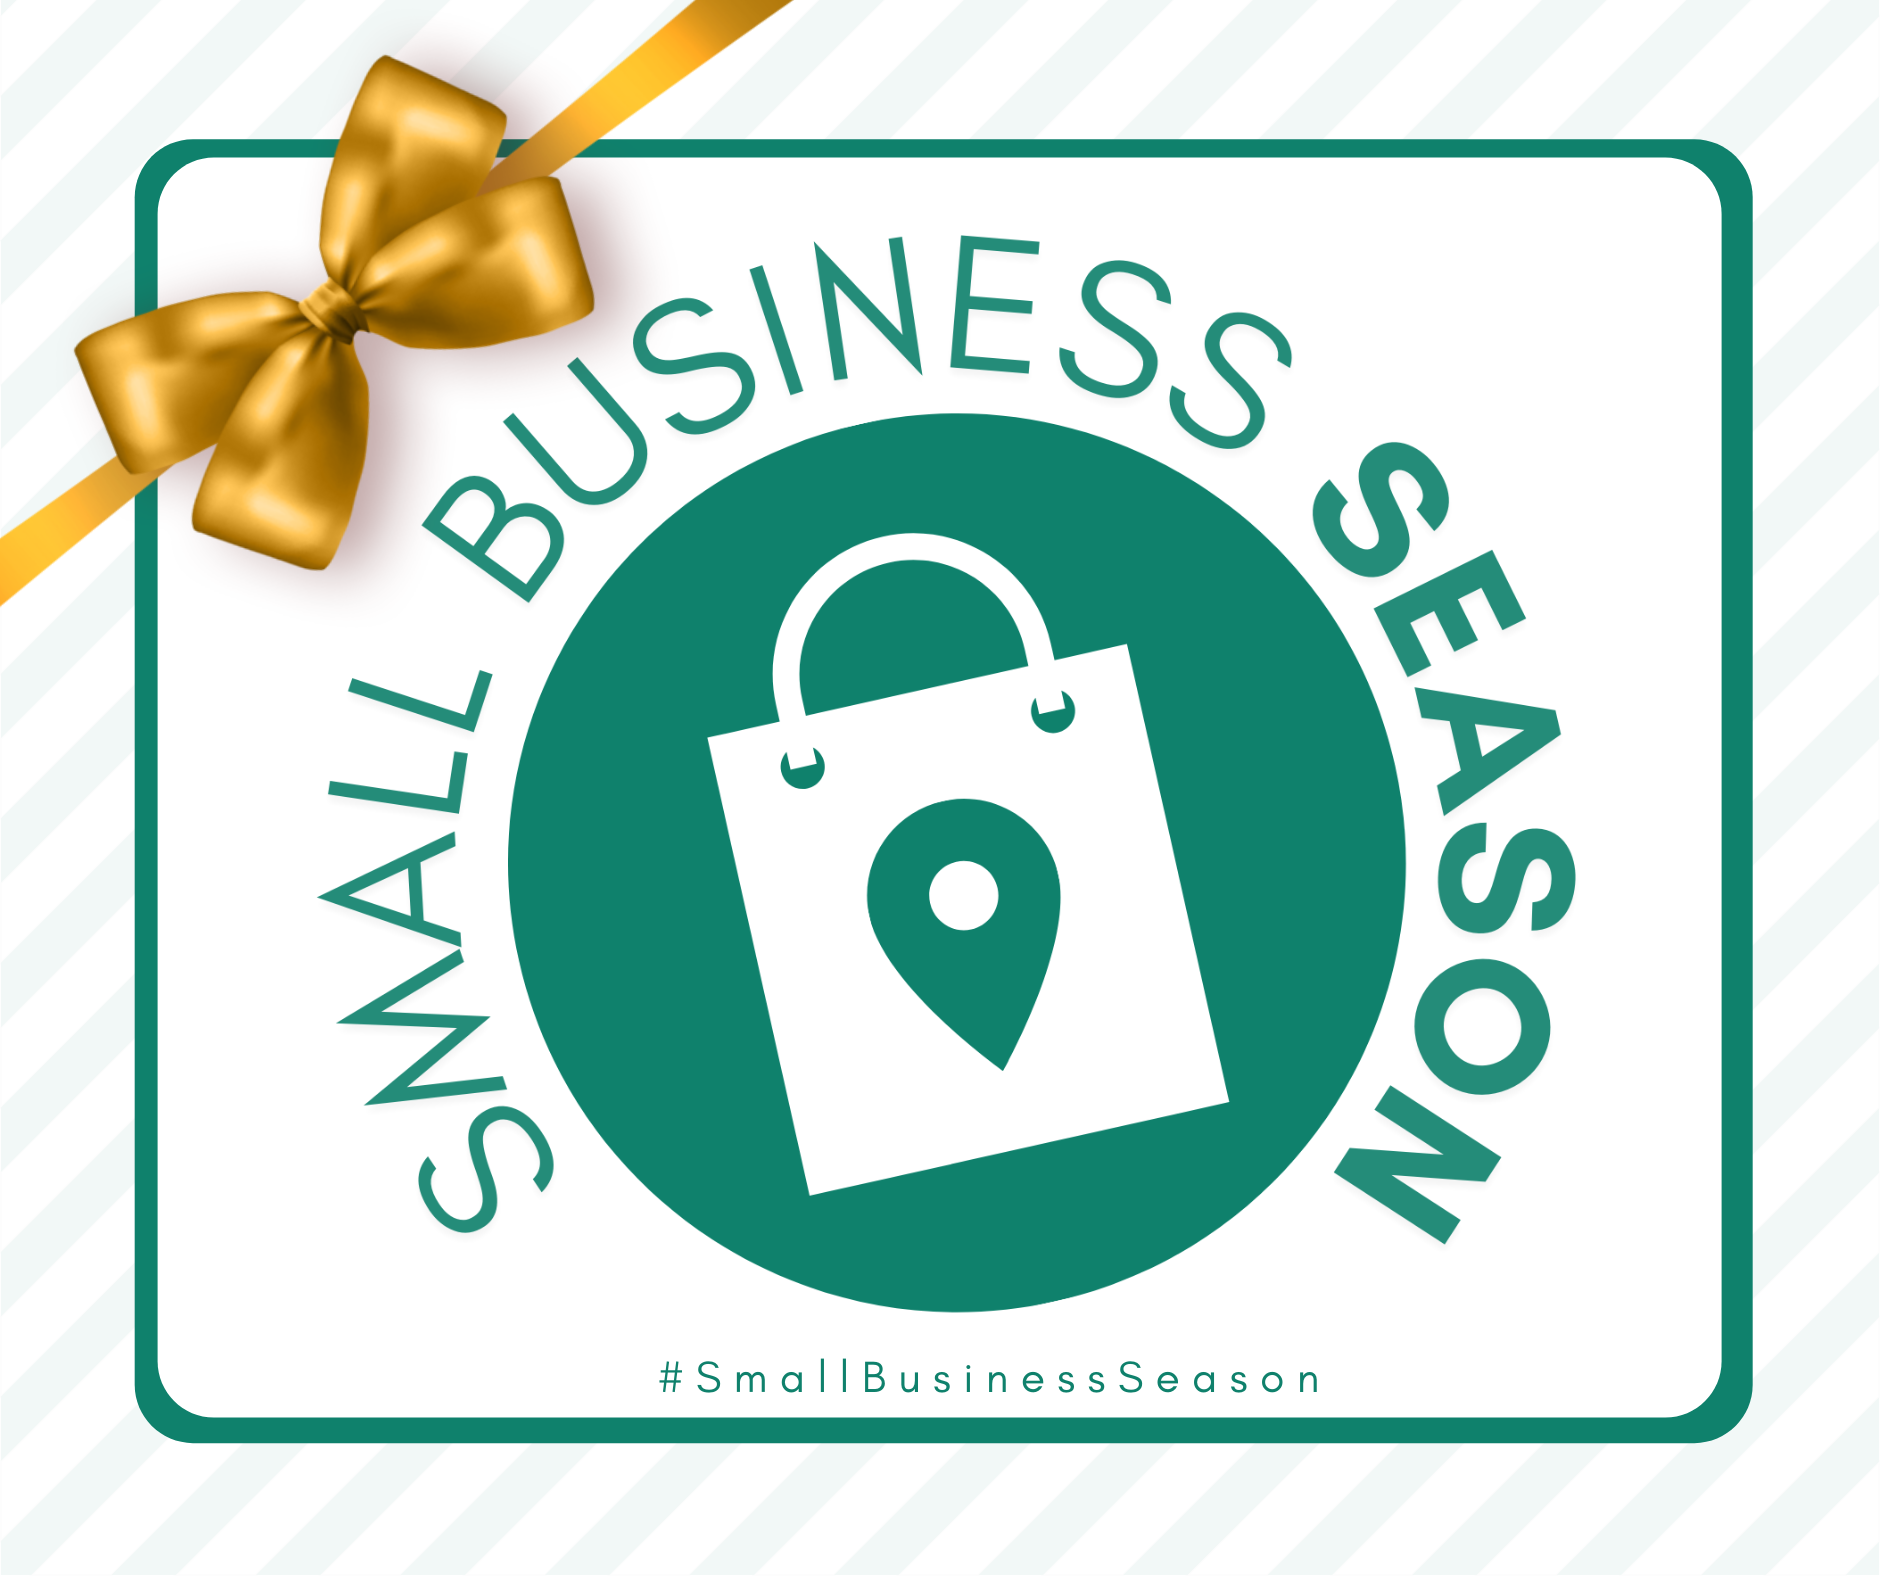 Image for Creating a Memorable Buying Experience This Small Business Season